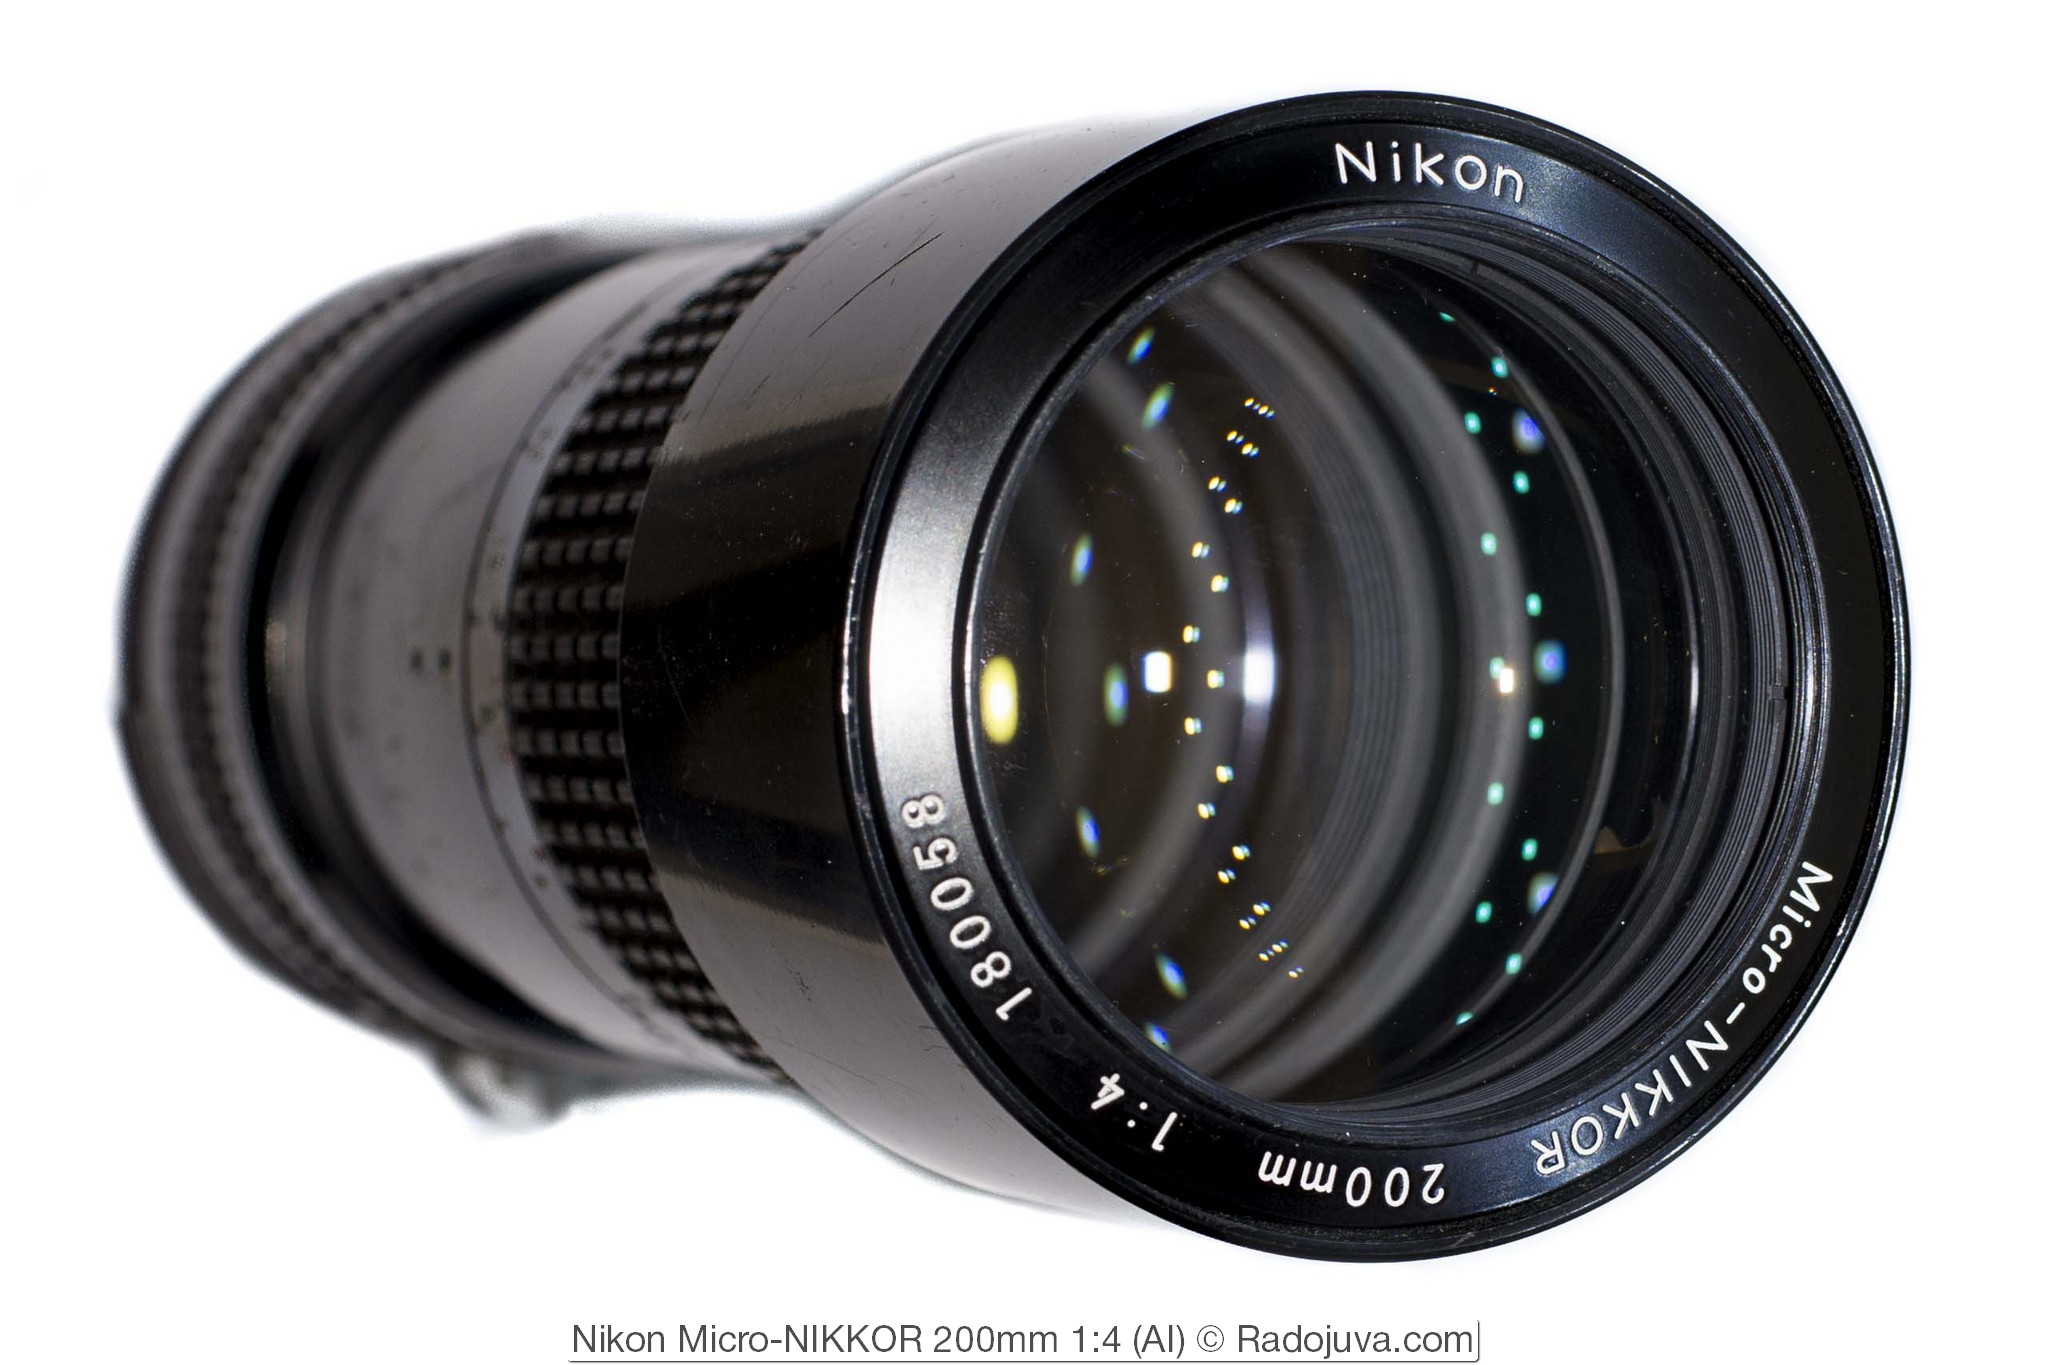 Nikon Micro-NIKKOR 200mm 1: 4 (AI). Review from the reader